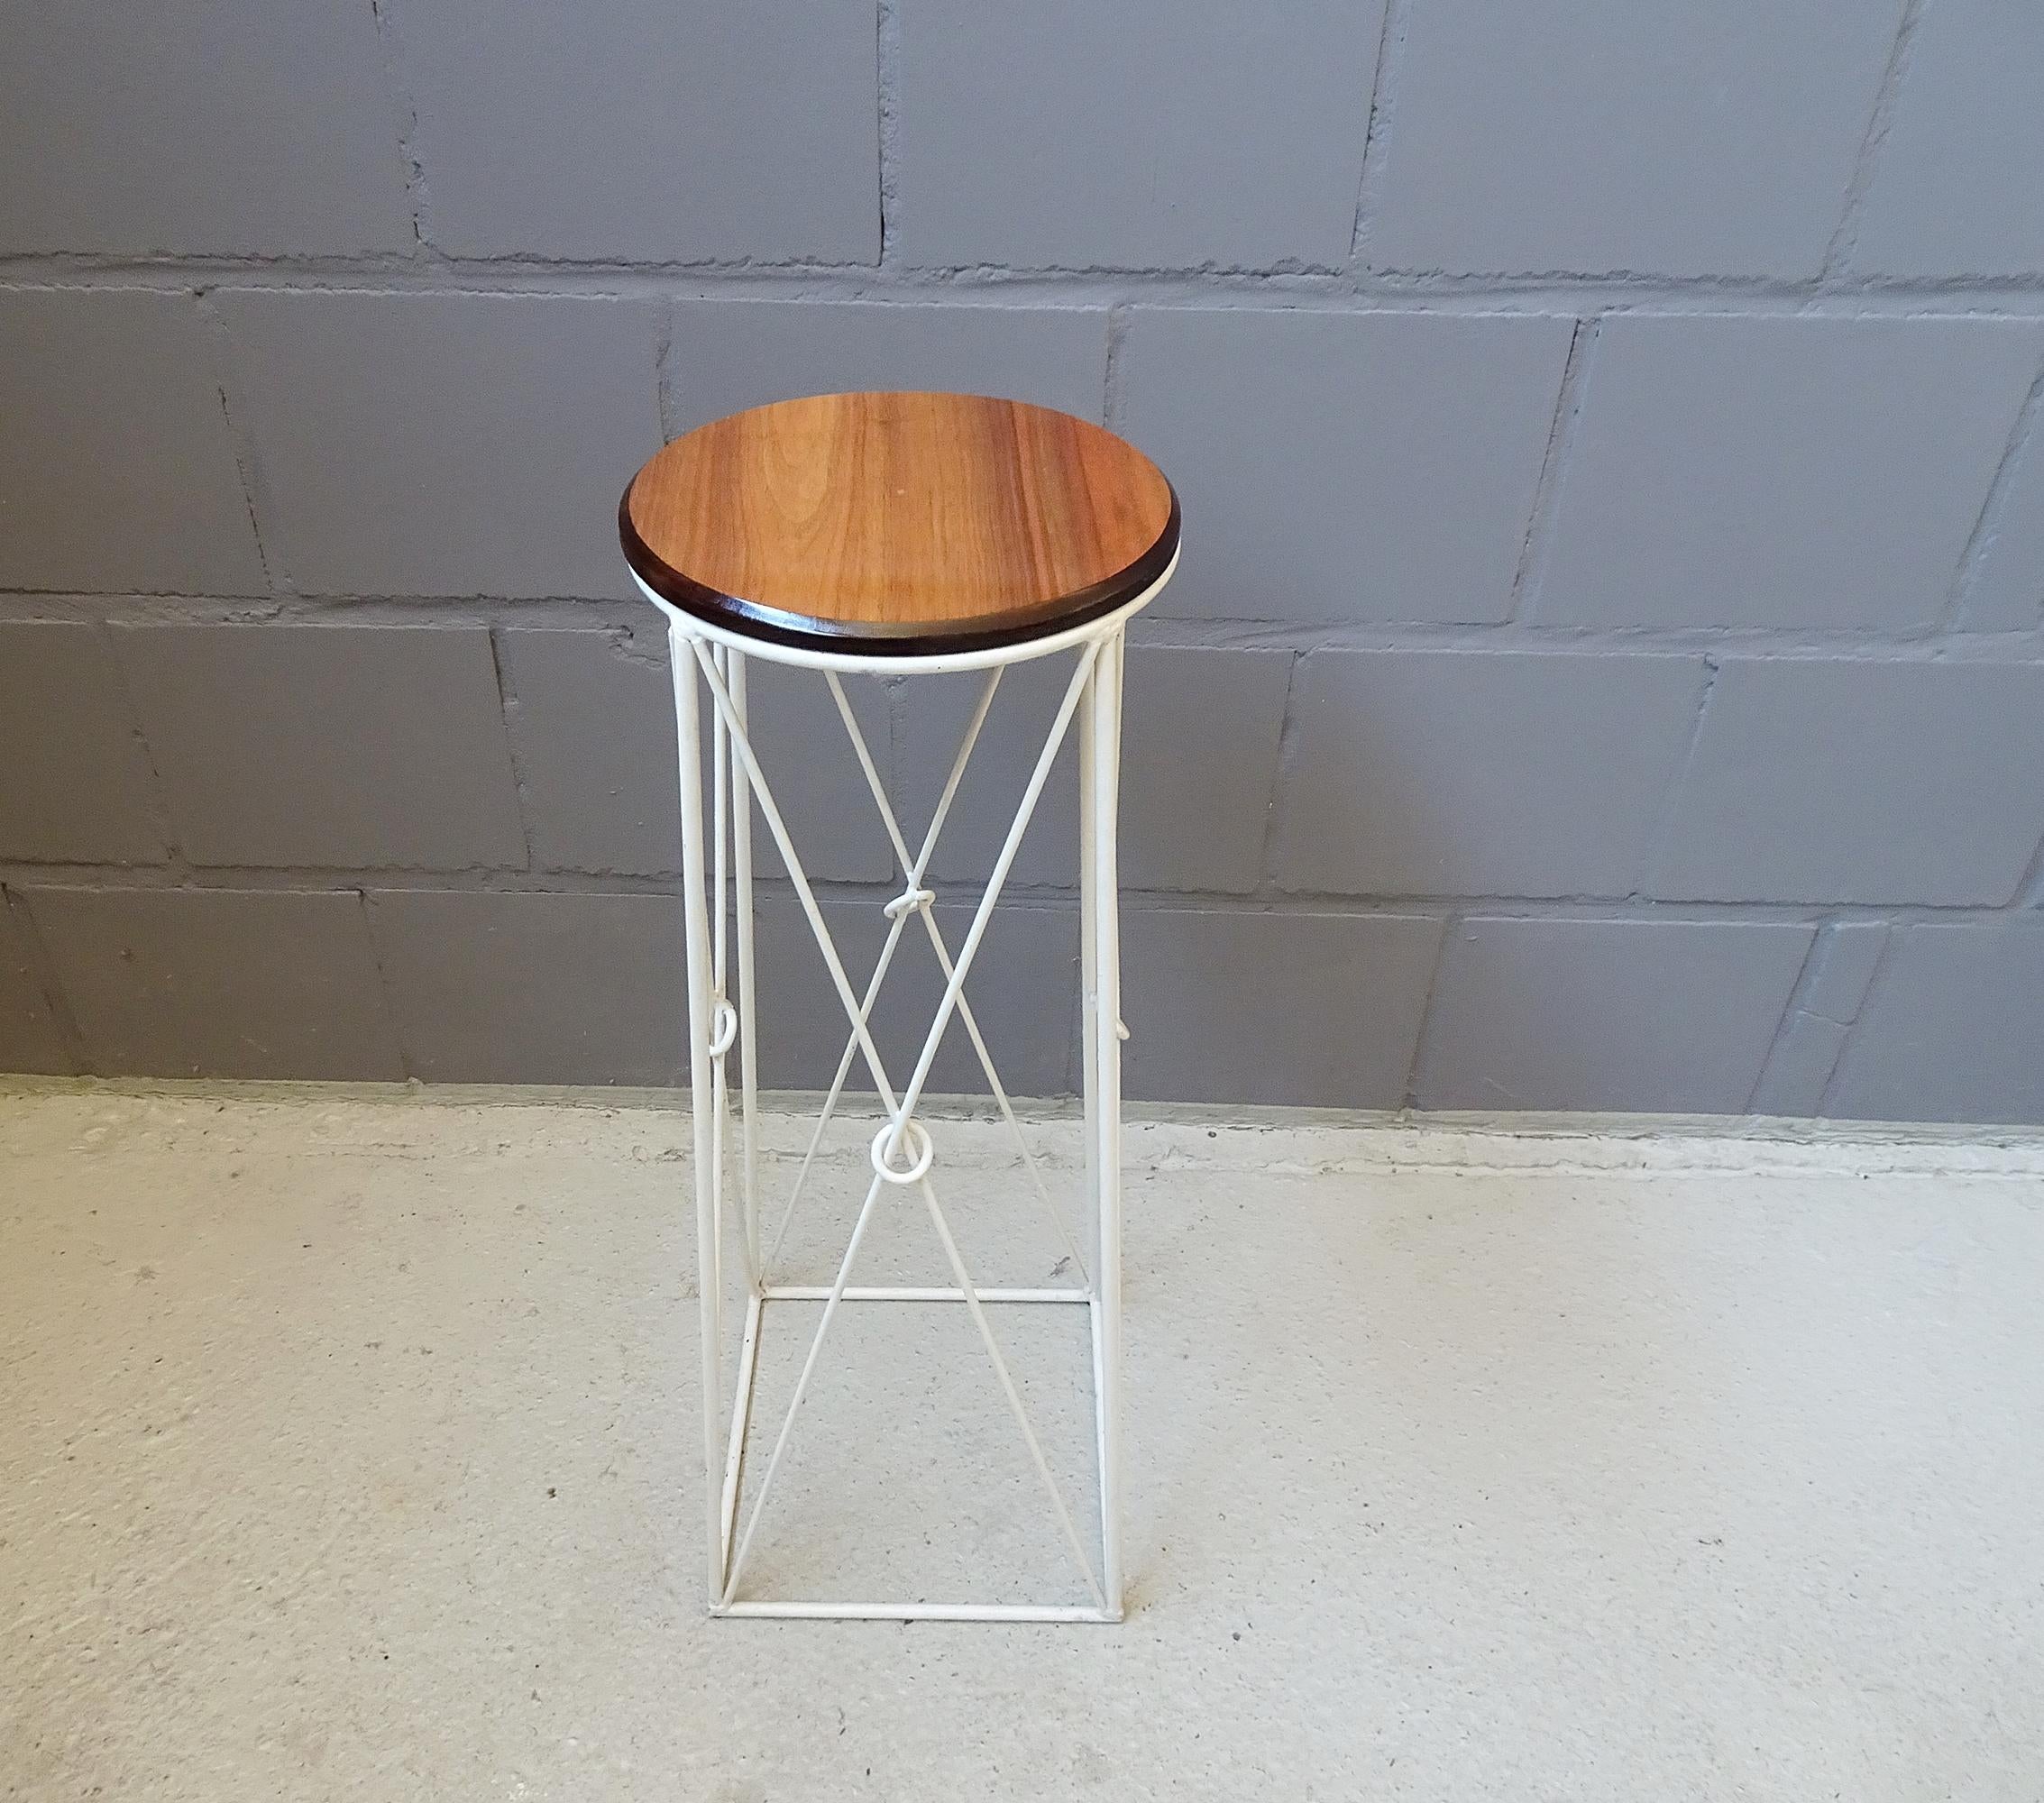 Large plant stand from the 1960s. A stylish plant column made of white lacquered iron and a wooden top. Filigree, modern design with a spacious floor space and high-quality workmanship.

The neutral coloring adapts to any living space and is a